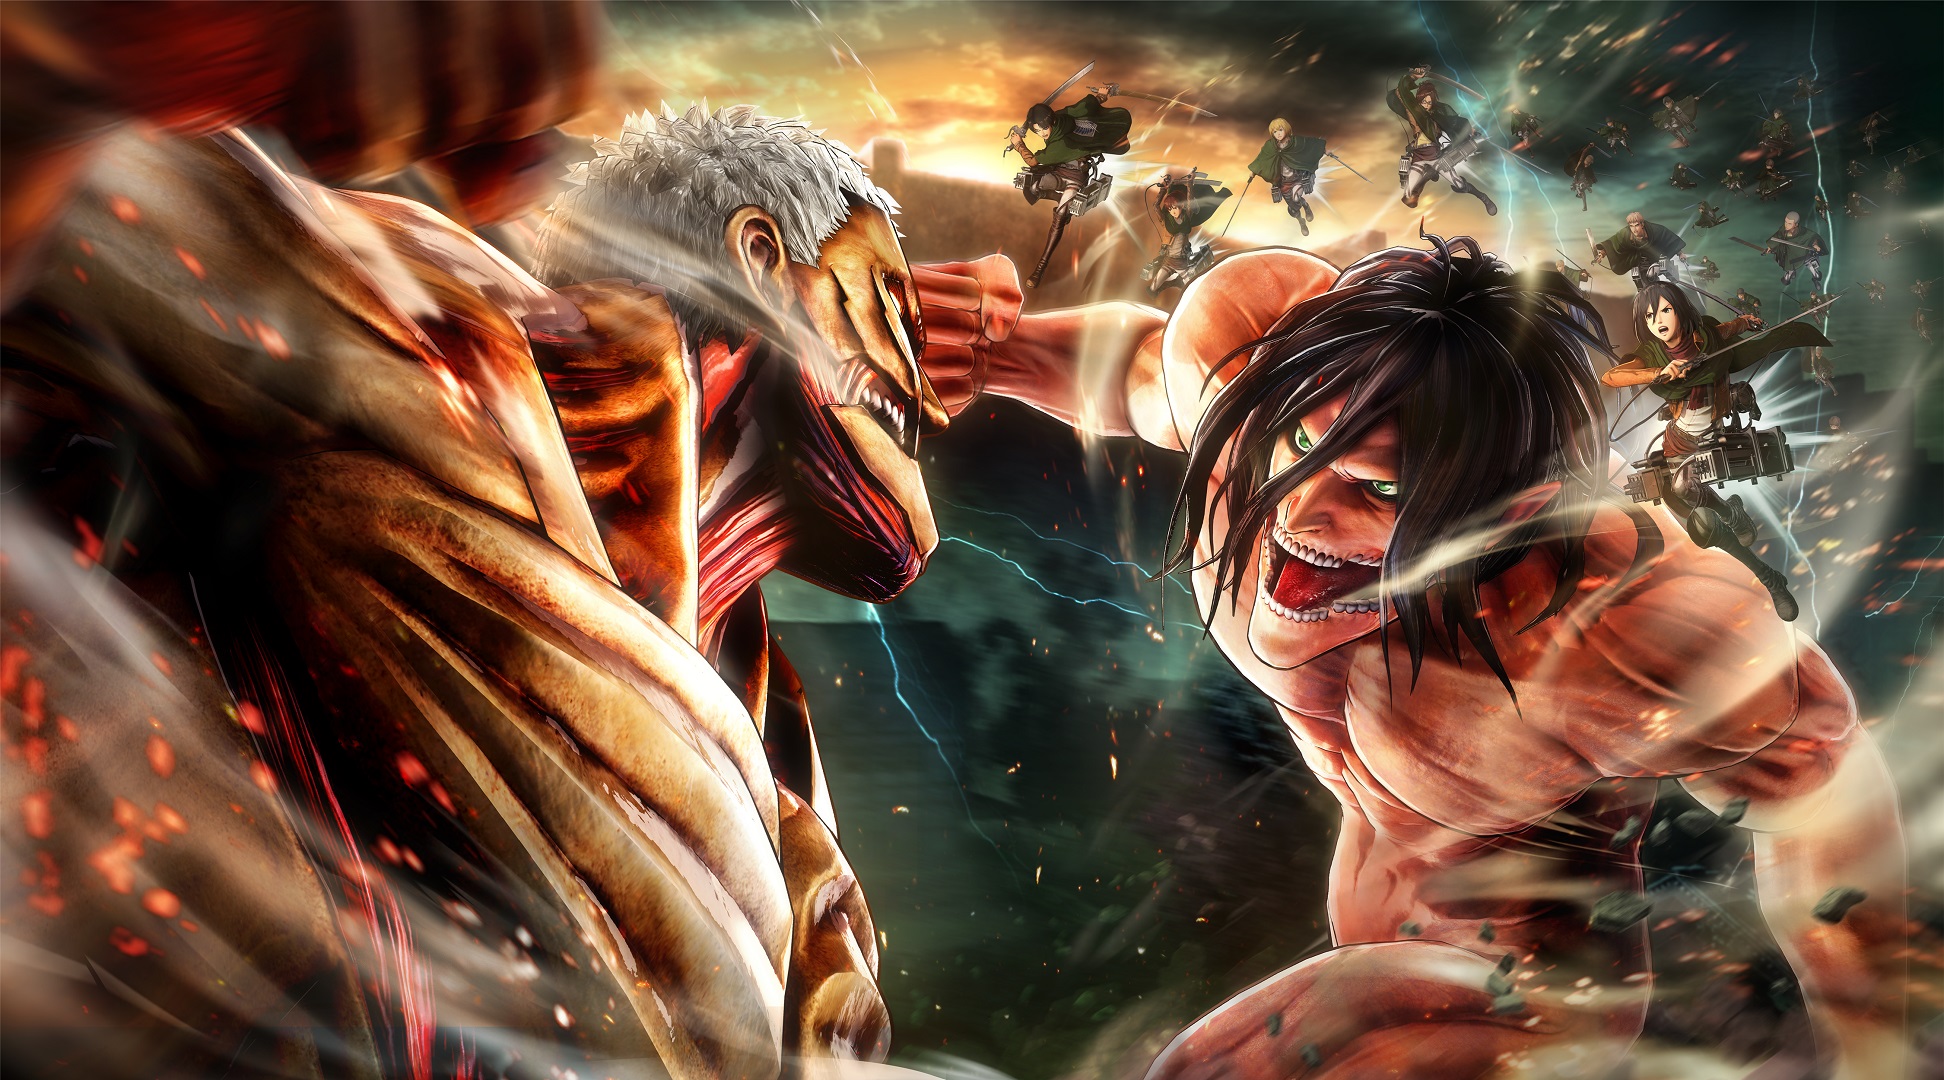 Attack on Titan recap: Everything that happened in the anime so